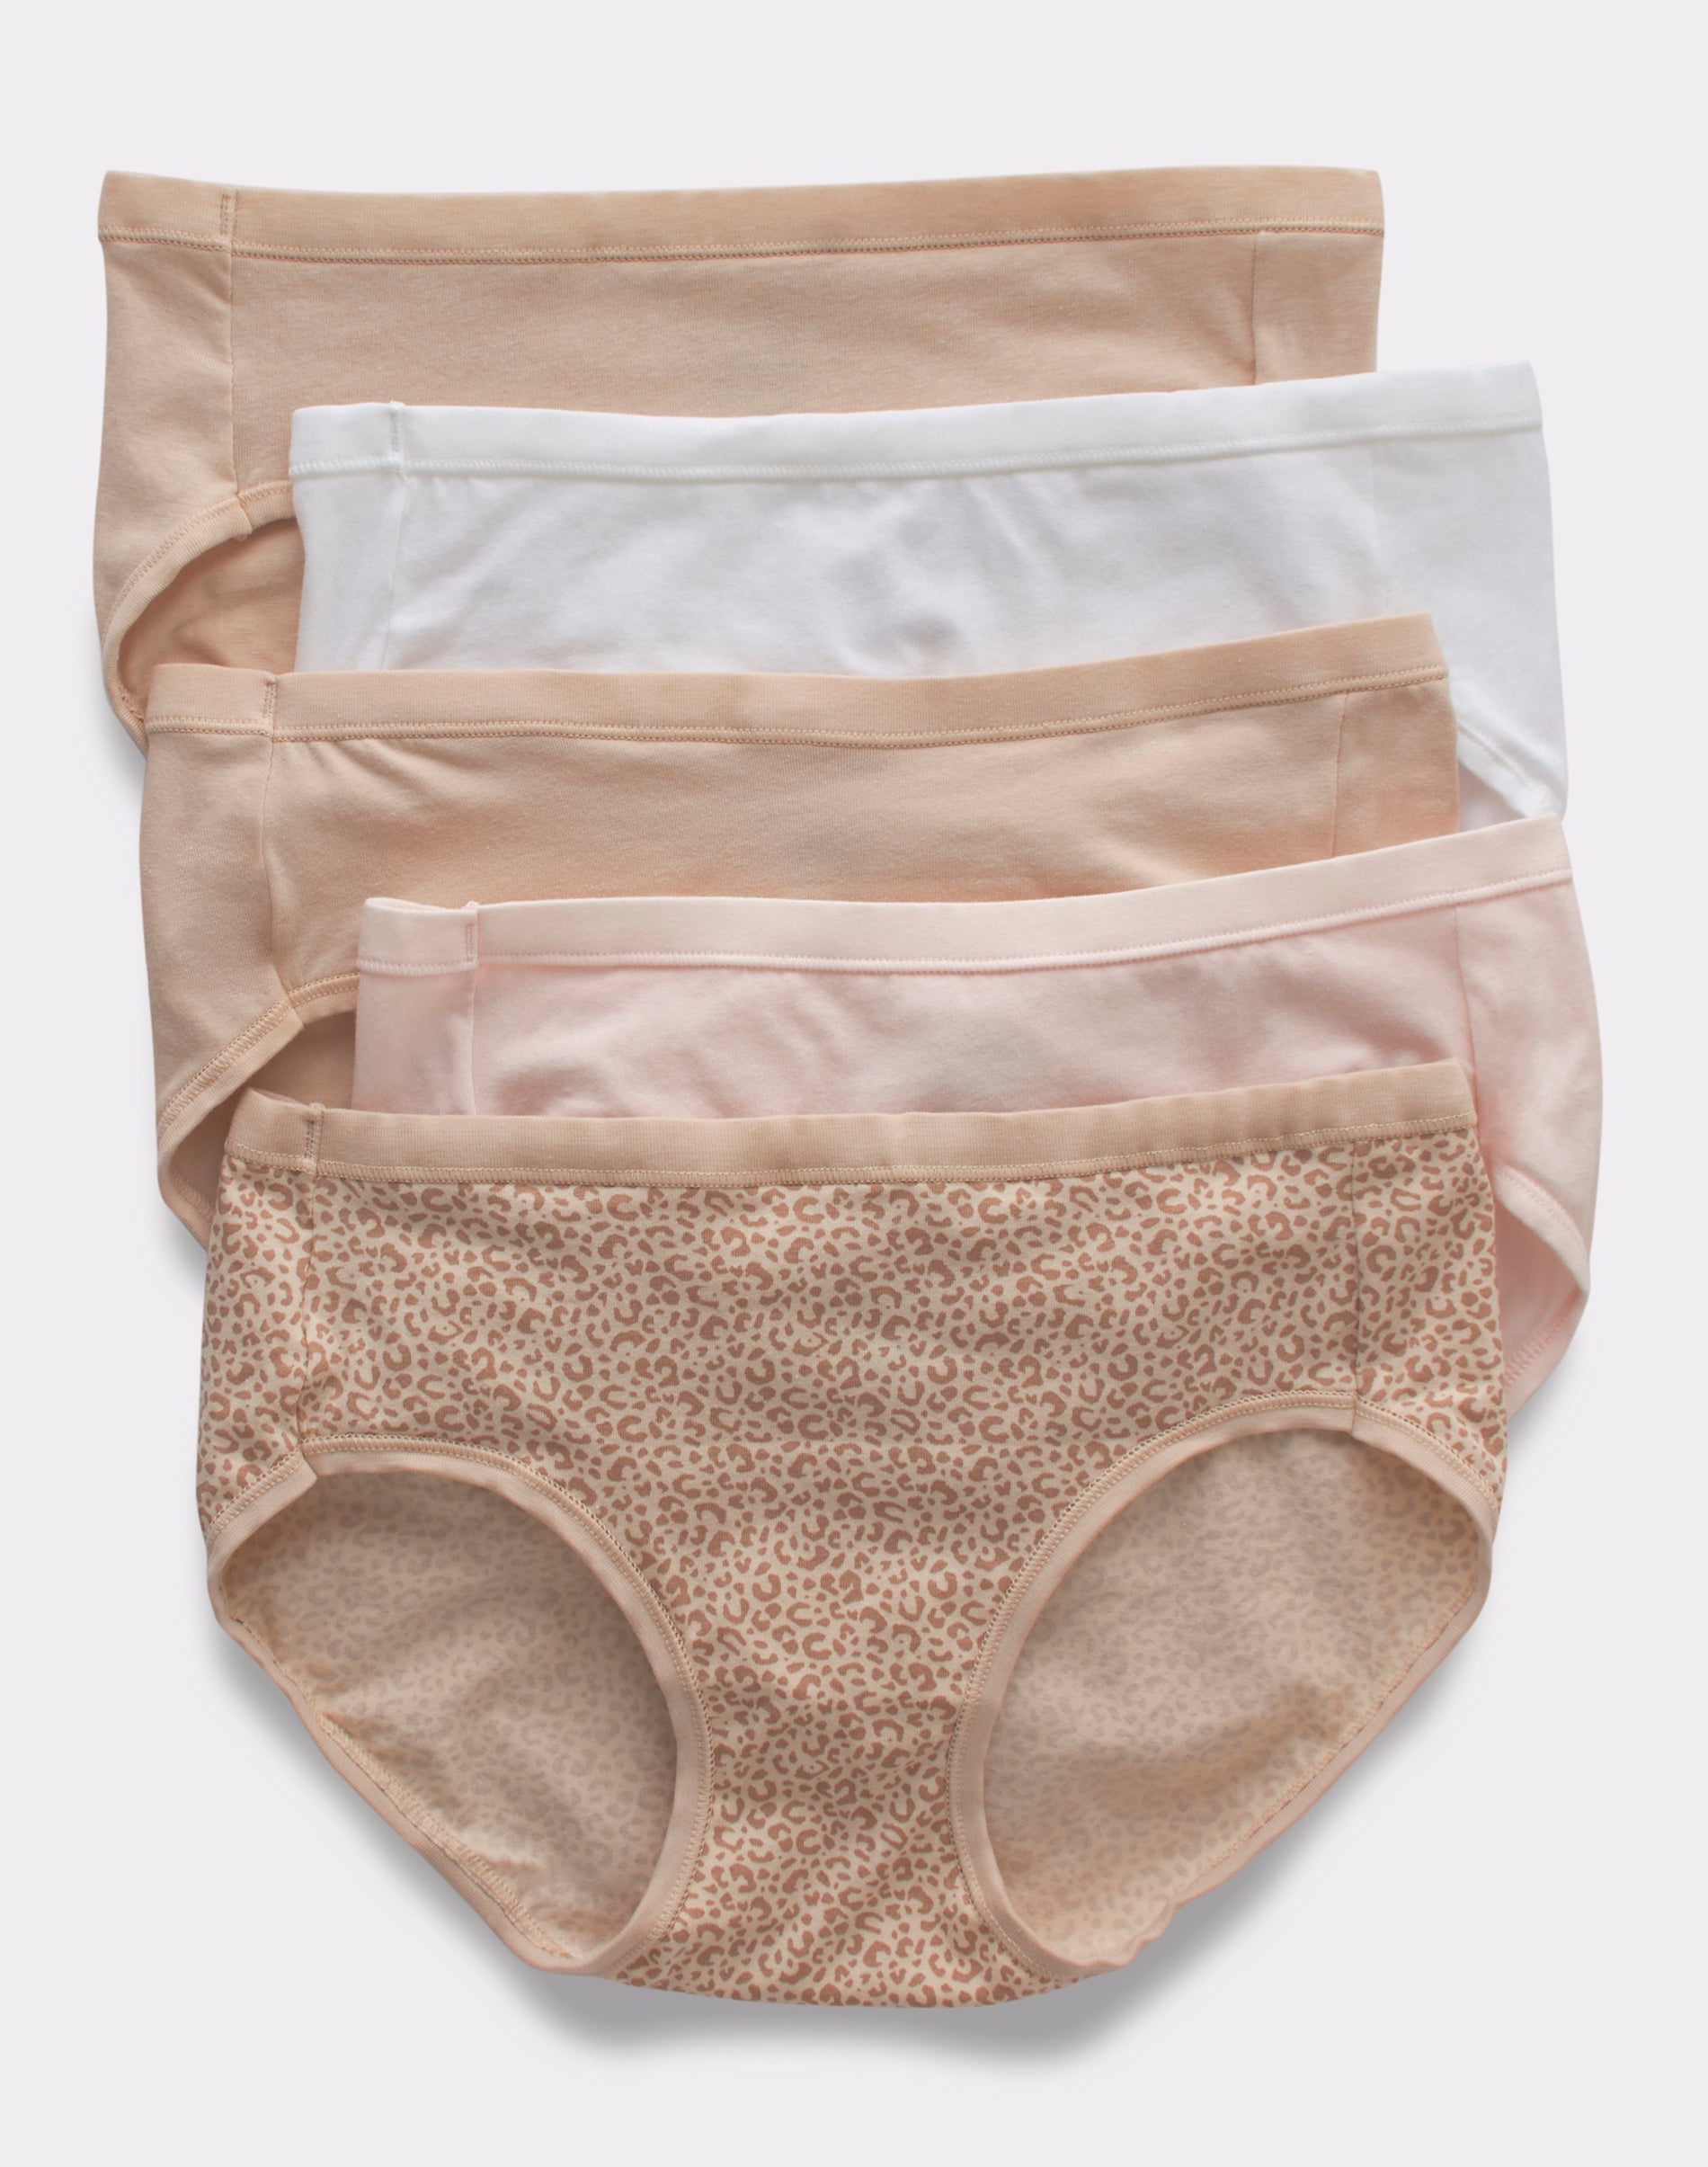 Hanes Ultimate ComfortSoft Women’s Hipster Underwear, 5-Pack Soft Taupe  Heather/Light Buff/Classic Leopard Print/White/Soft 5